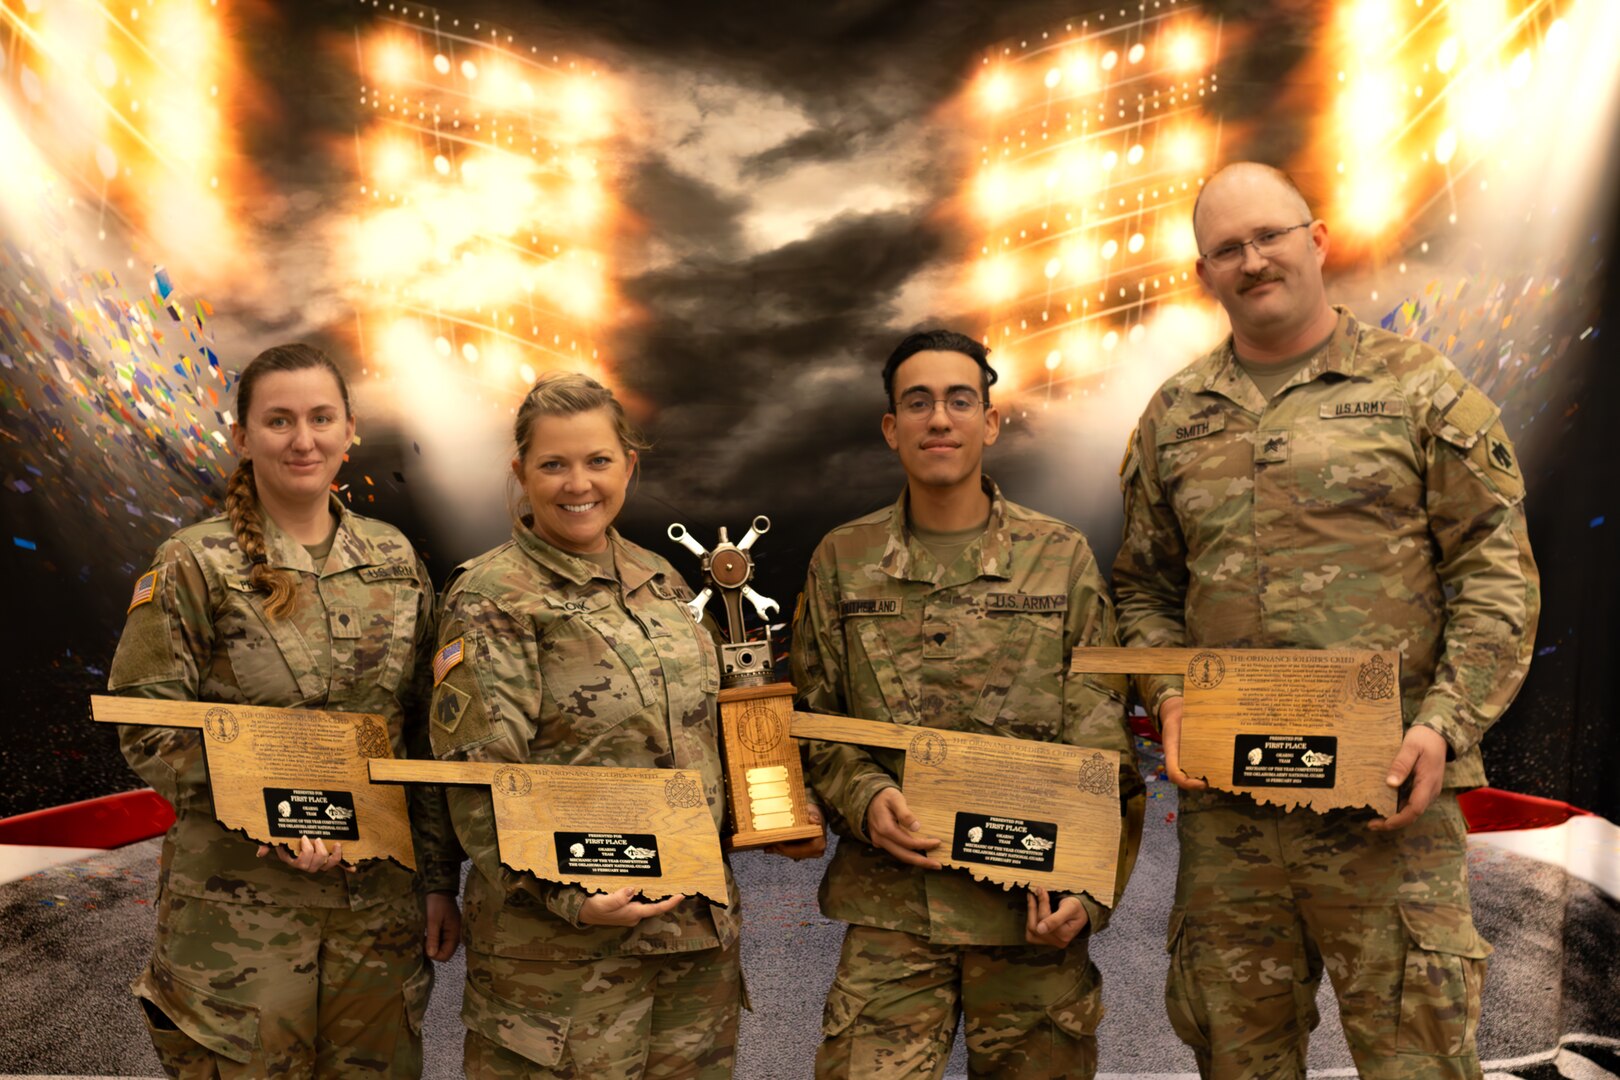 (From left to right) Oklahoma Army National Guardsmen Spc. Shawnda Preast, Sgt. Hope York, Spc. Demitri Southerland and Sgt. Samuel Smith, a mechanic team representing the 345th Combat Sustainment Support Battalion, 90th Troop Command, pose with their award after winning first overall team in the traditional Guardsmen category at the third annual Mechanic of the Year competition held at the Combined Support Maintenance Shop in Norman, Oklahoma, Feb. 10, 2024. (Oklahoma National Guard photo by Cpl. Danielle Rayon)